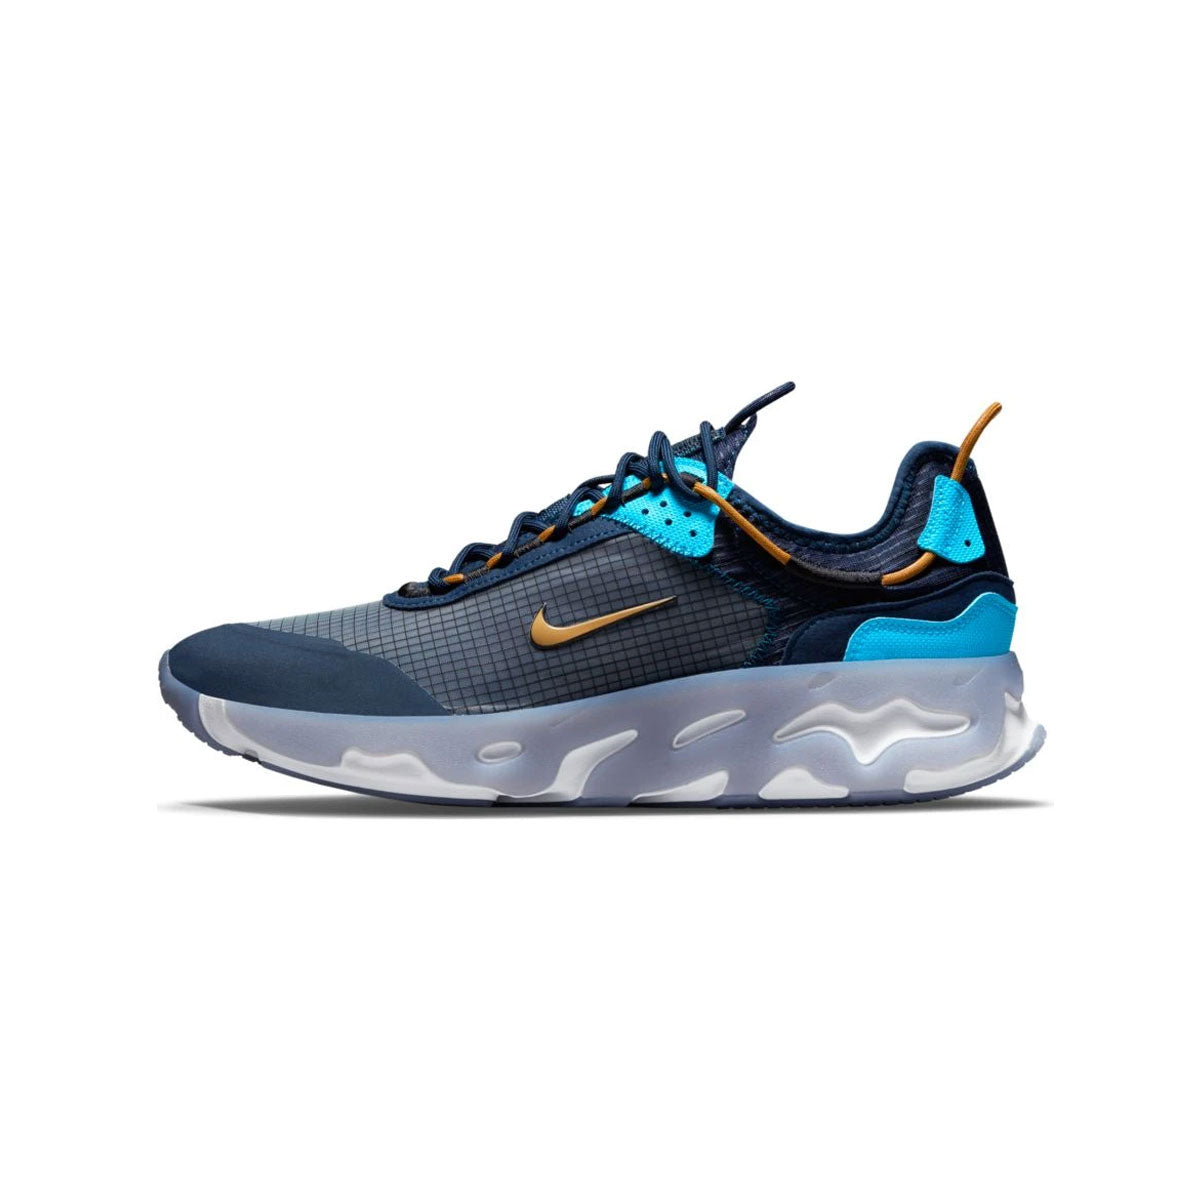 Nike React Live Midnight Navy Turquoise Blue